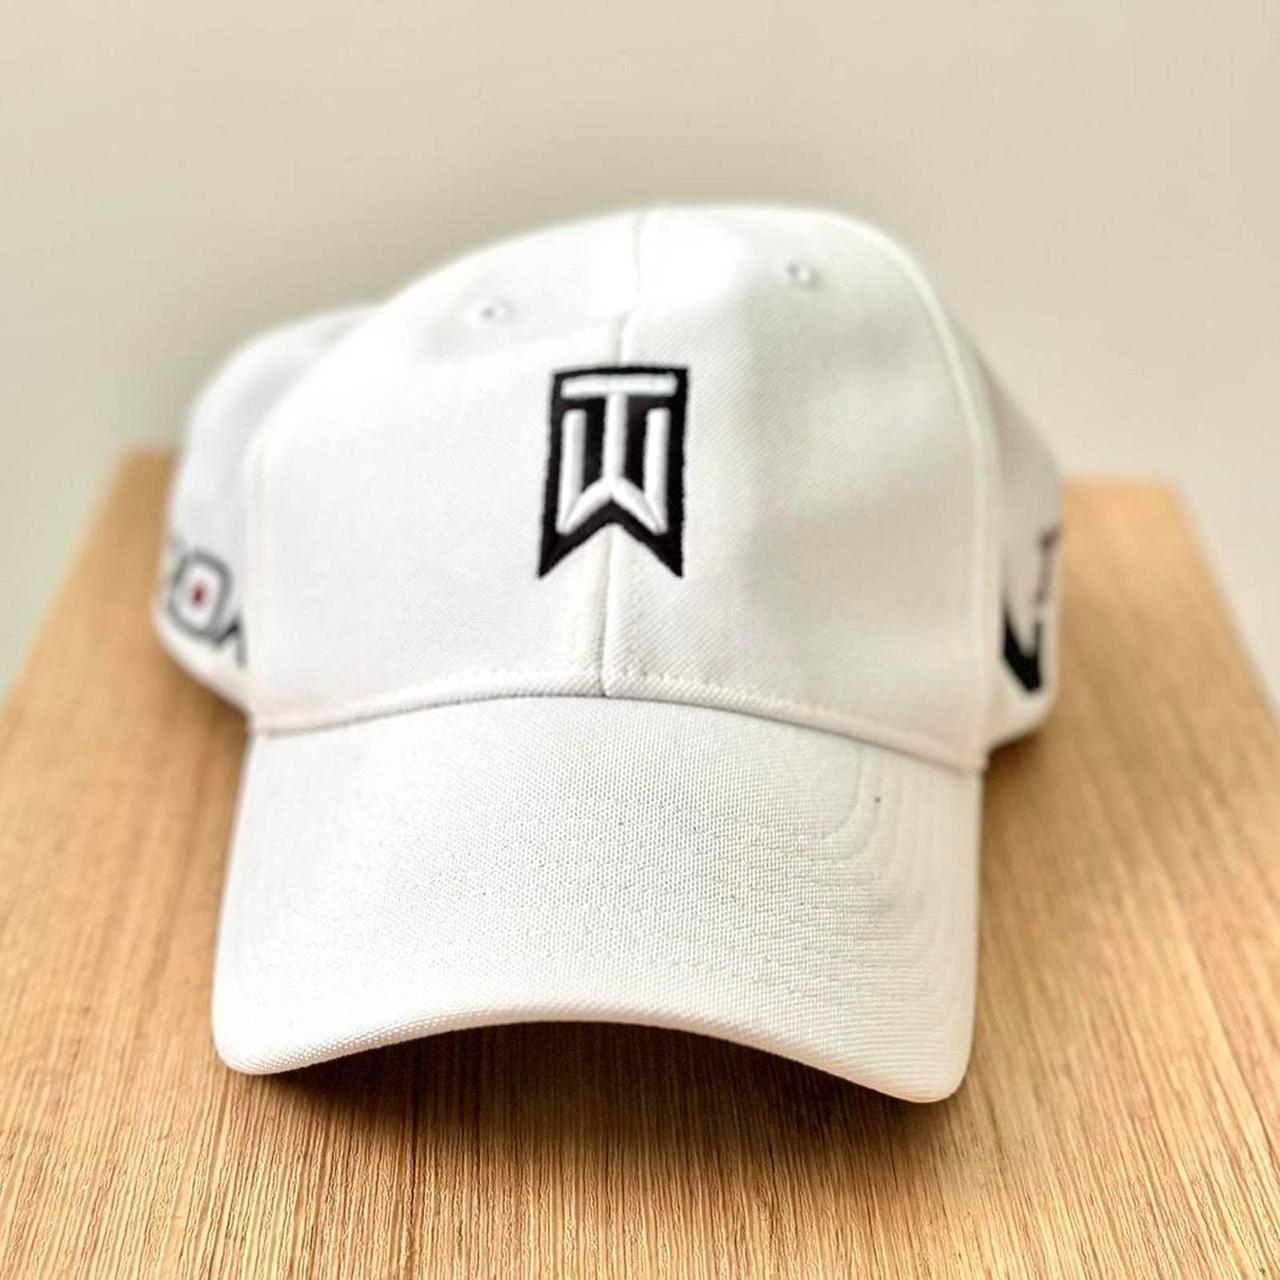 Nike 20xi Rare Tiger Woods Collection Hat - Depop